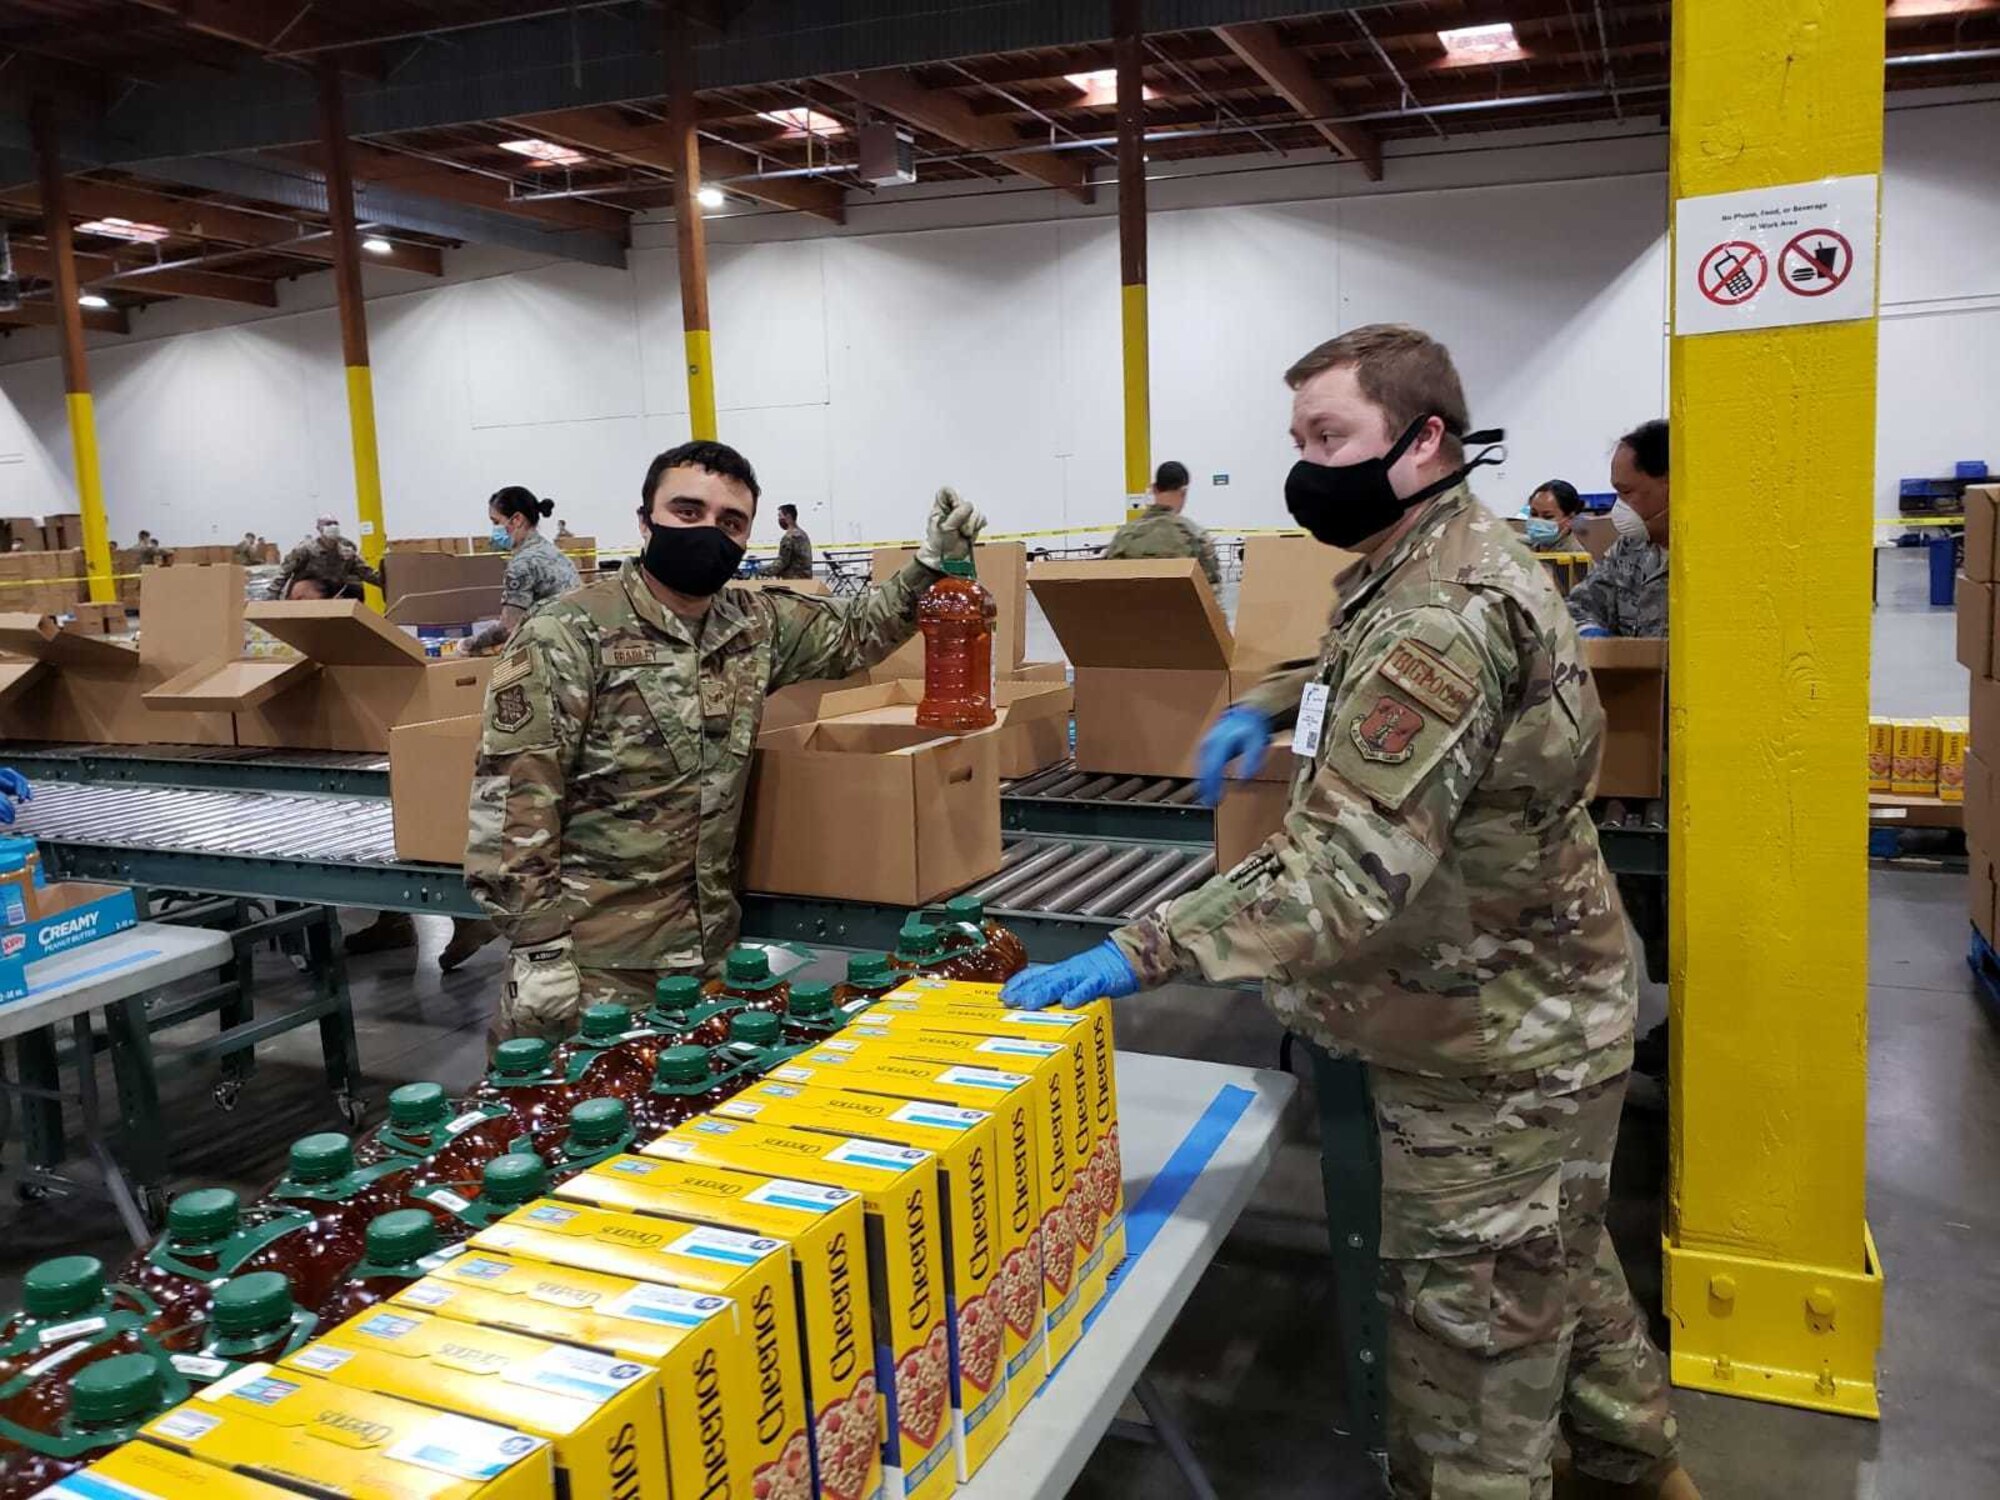 U.S. Air Force Staff Sgt. Matthew Bradley, left, and U.S. Air Force Staff Sgt. Jeremiah Jensen, right, both assigned to the 225th Air Defense Squadron, prepare food boxes at the Food Lifeline COVID Response warehouse April 23, 2020, in Seattle, Washington.  More than 250 Air and National Guardsmen are assigned to the warehouse where they are able to prepare, on average, 268 boxes an hour per line. (U.S. Air National Guard photo)